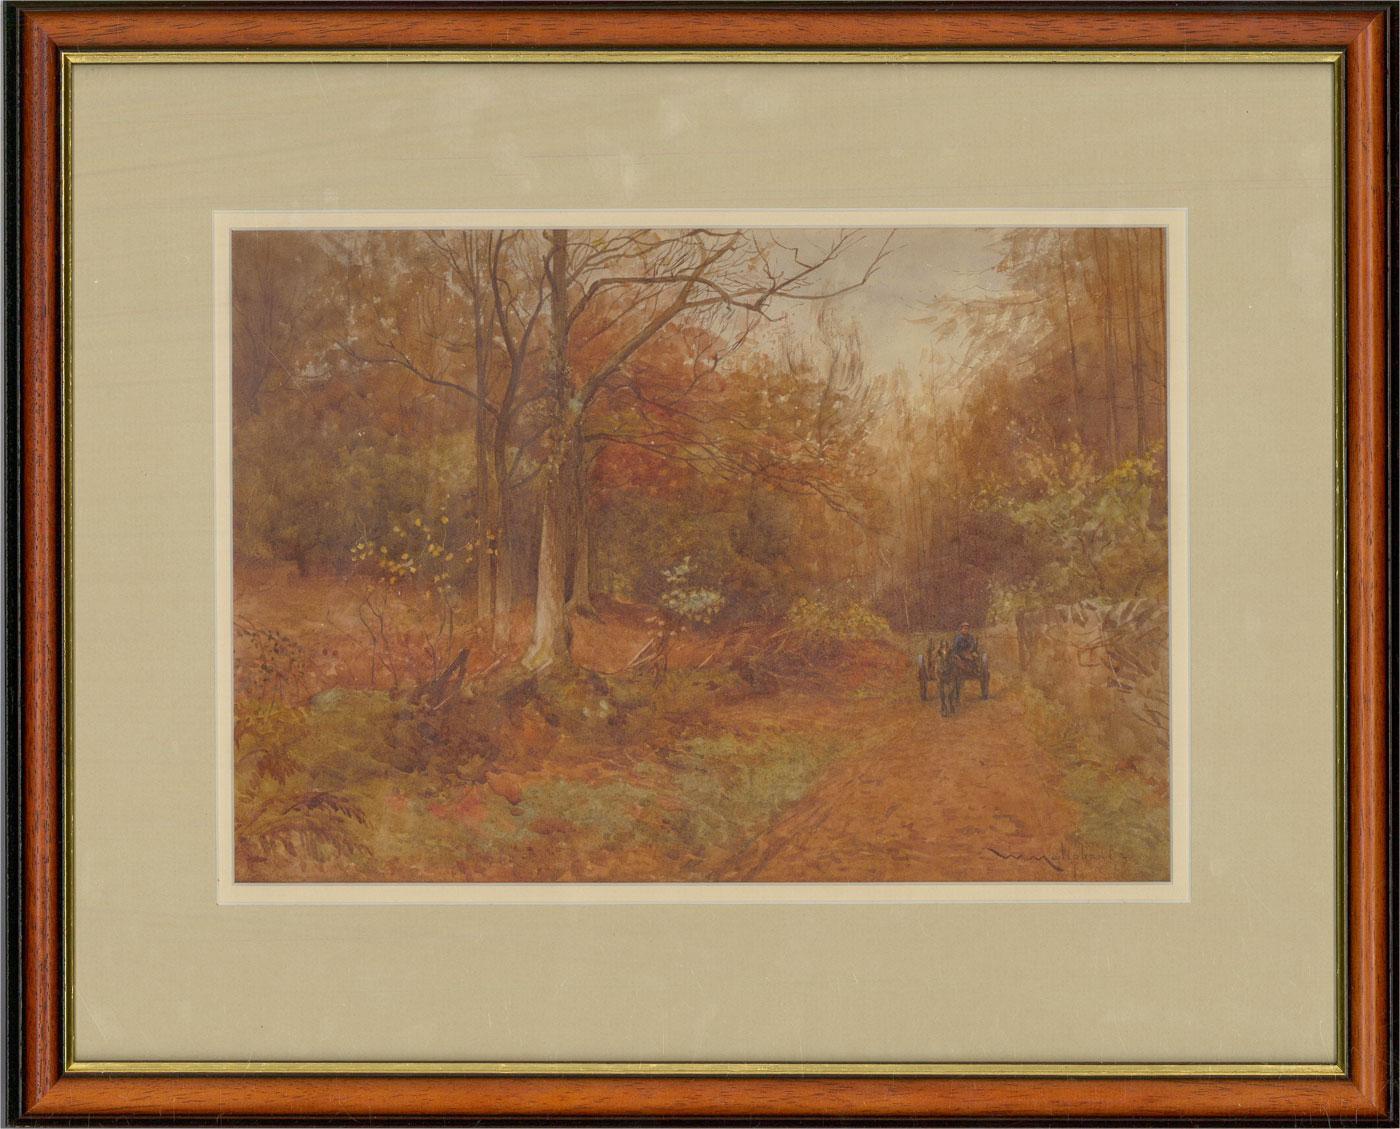 A charming late 19th century watercolour by artist William Maliphant, depicting a horse drawn cart on a woodland track. Signed and dated to the lower right hand corner. Well presented in a fine wooden frame with gilt slip and beige mount. Glazed. On